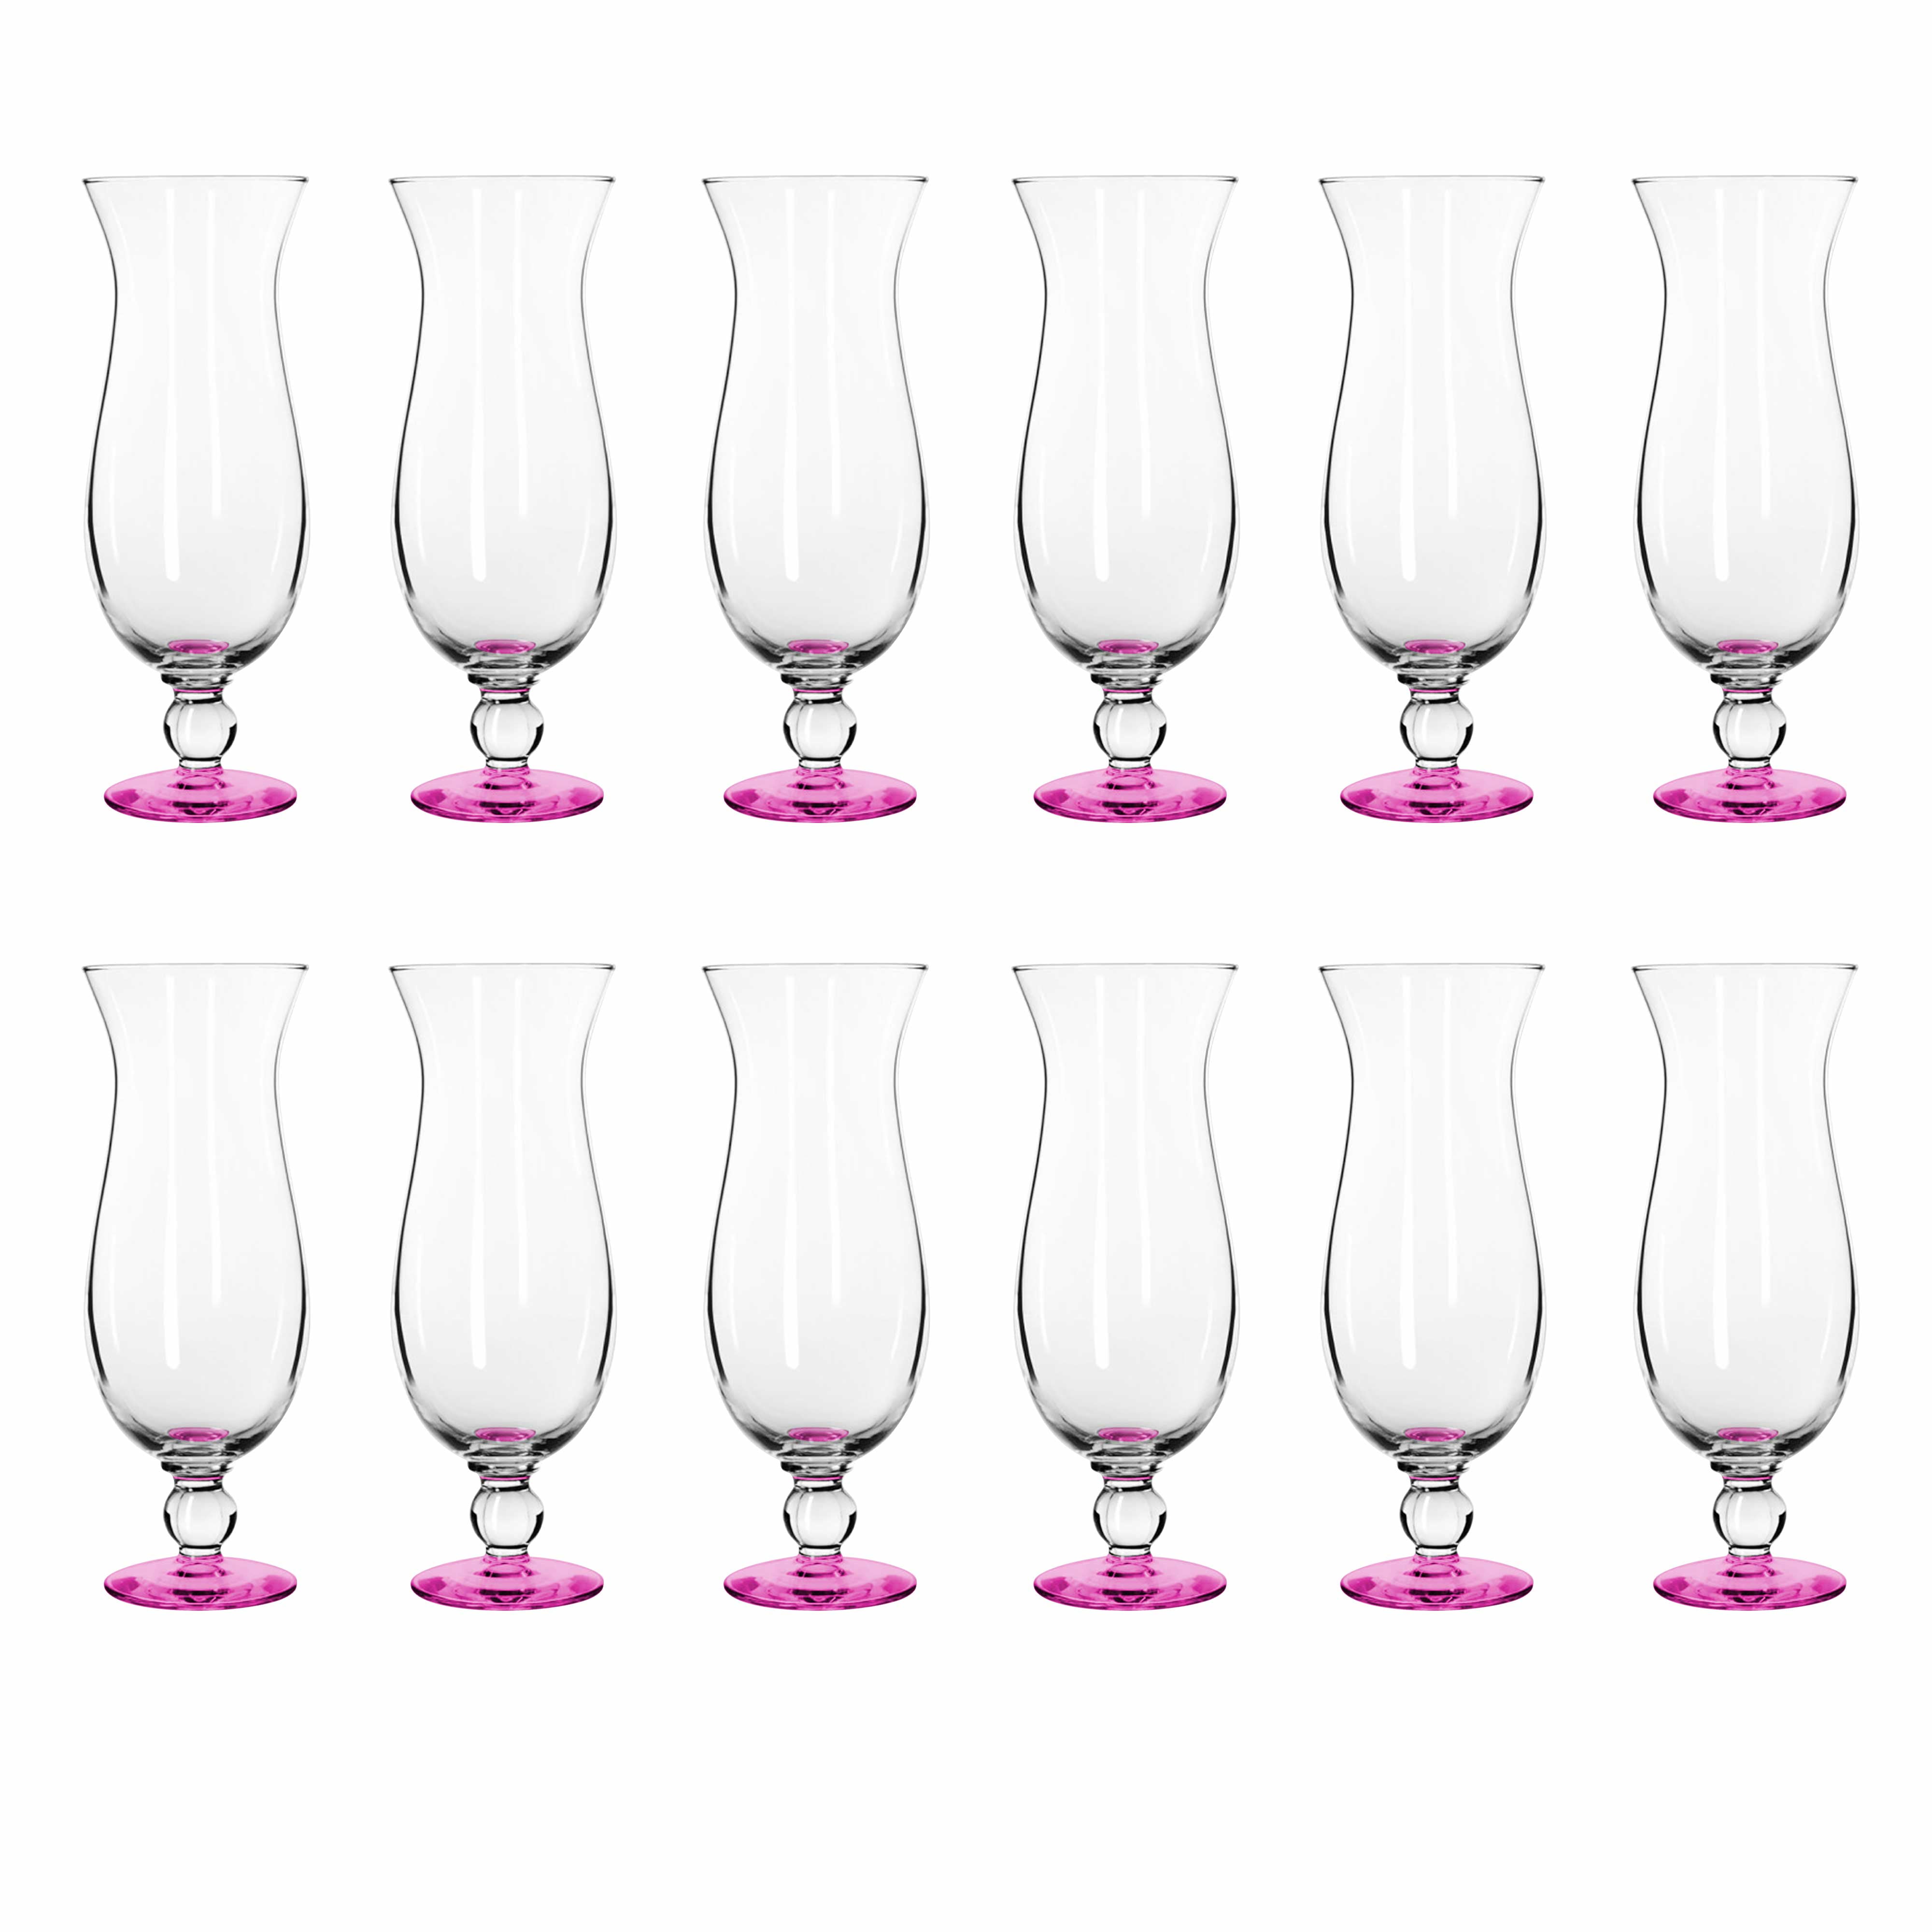 Olympia Crystal Hurricane Glasses 340ml (Pack of 6) - GM578 - Buy Online at  Nisbets